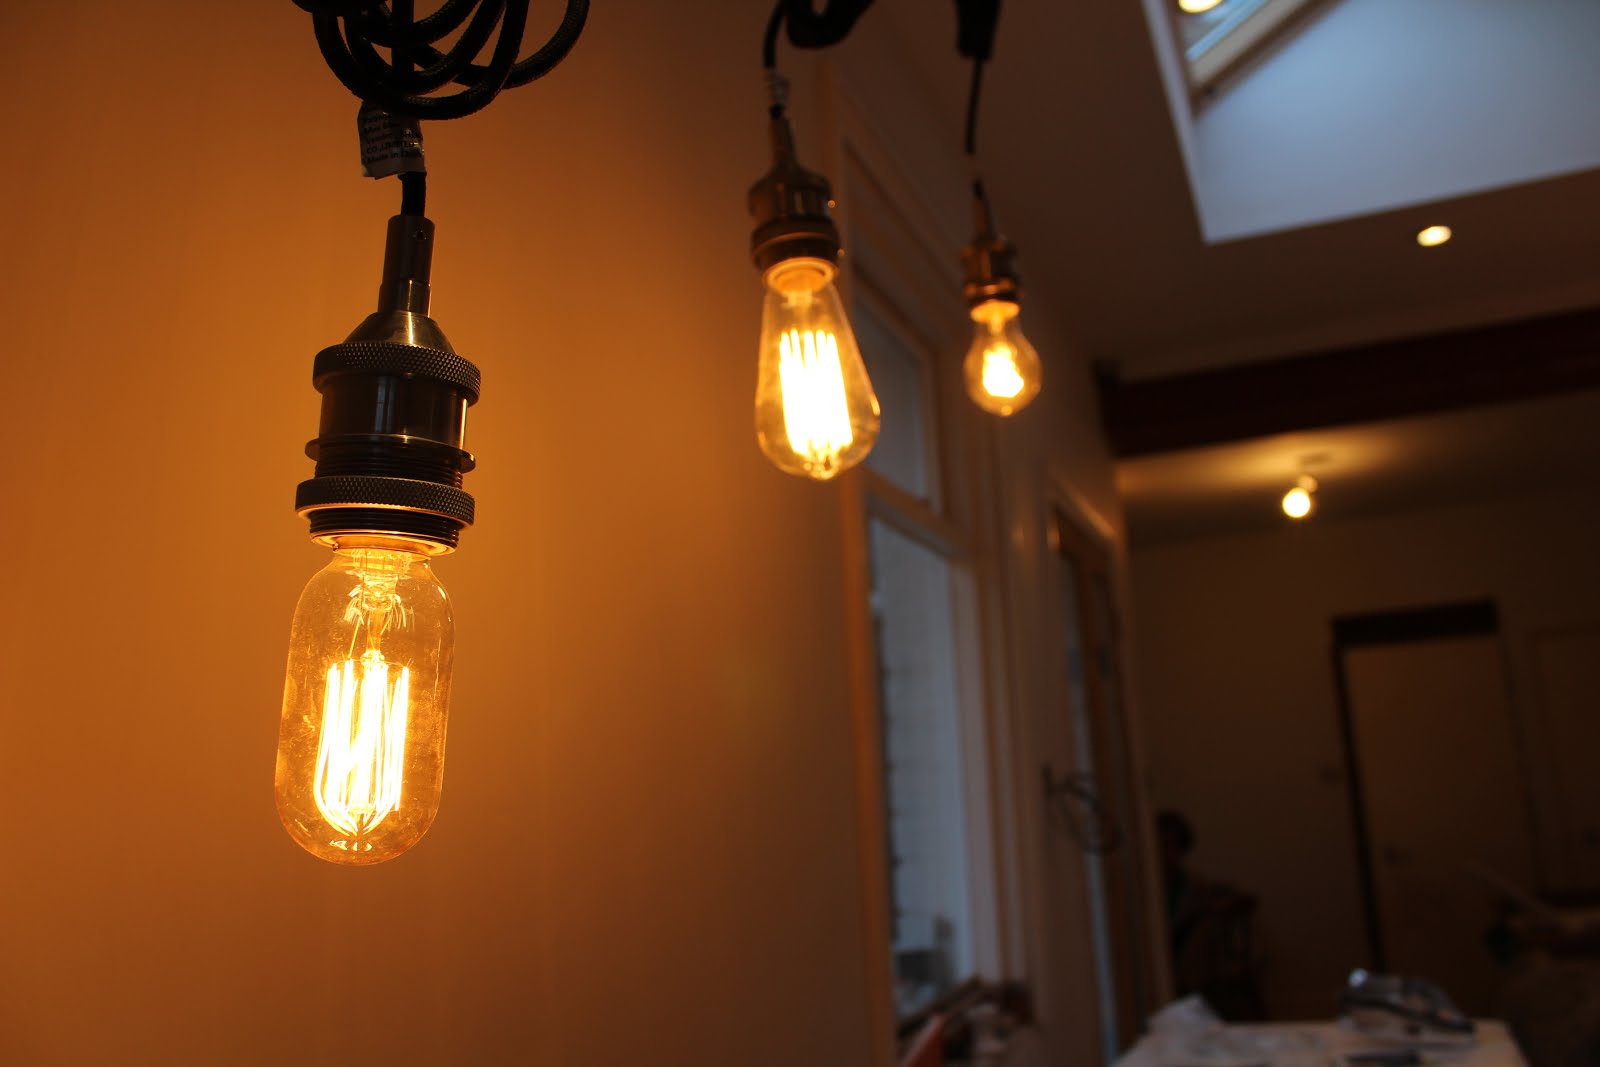 5 Ways to make your home smarter